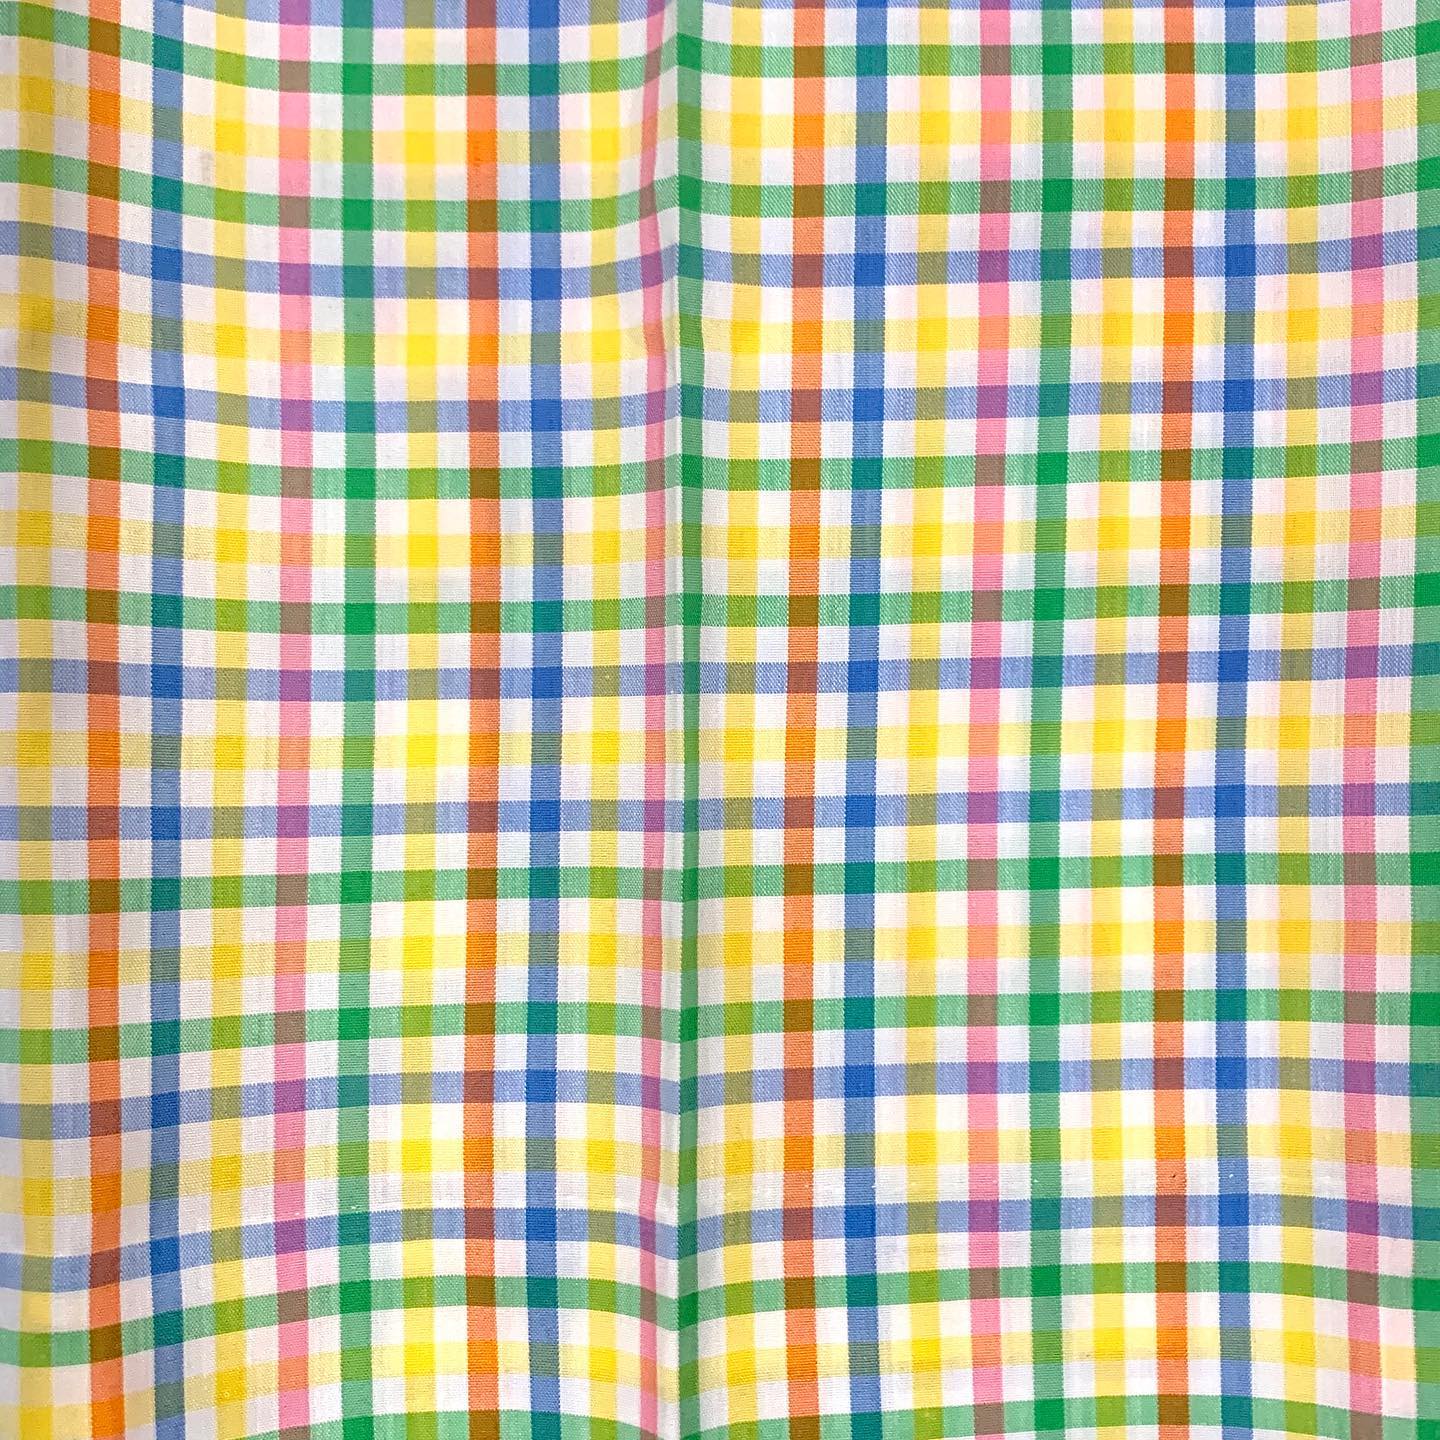 https://nvisionshop.com/wp-content/uploads/2020/06/Vintage-rainbow-gingham-high-waisted-pants-detail.jpg